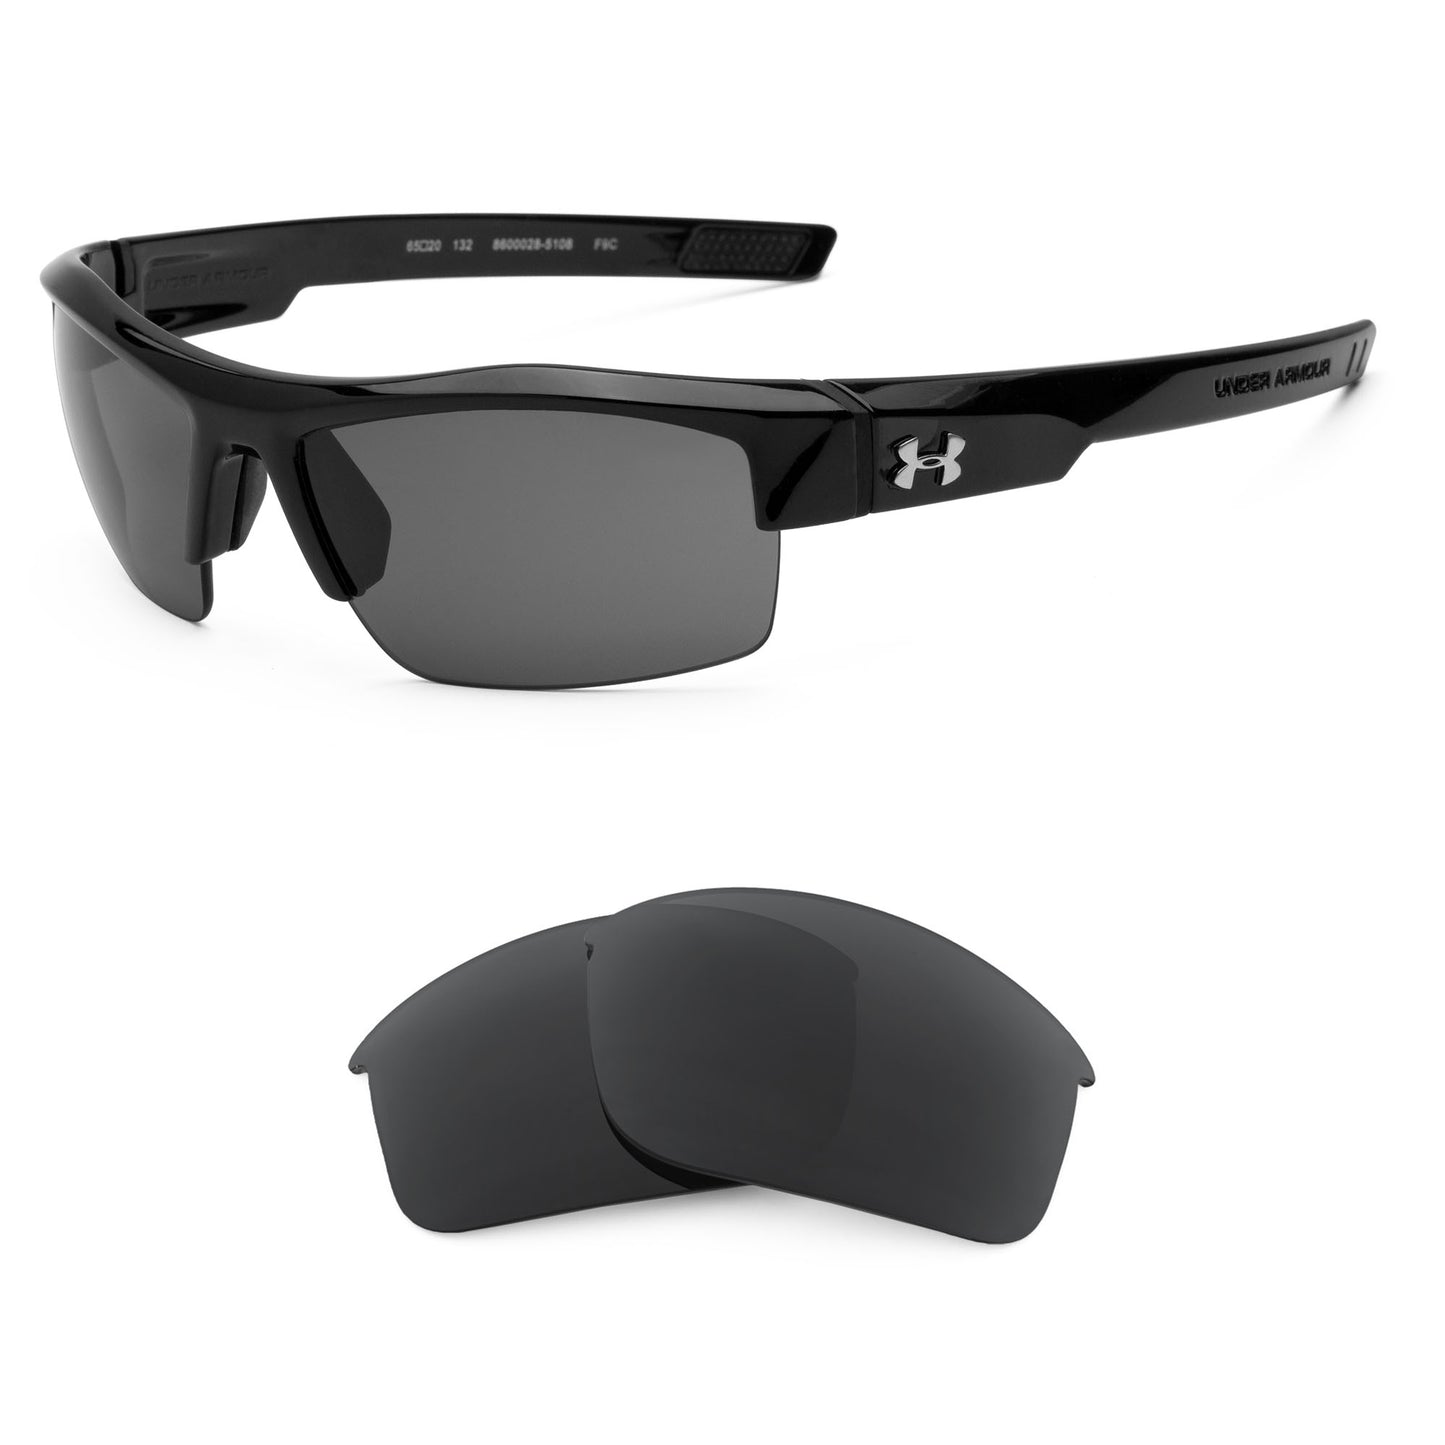 Under Armour Igniter sunglasses with replacement lenses